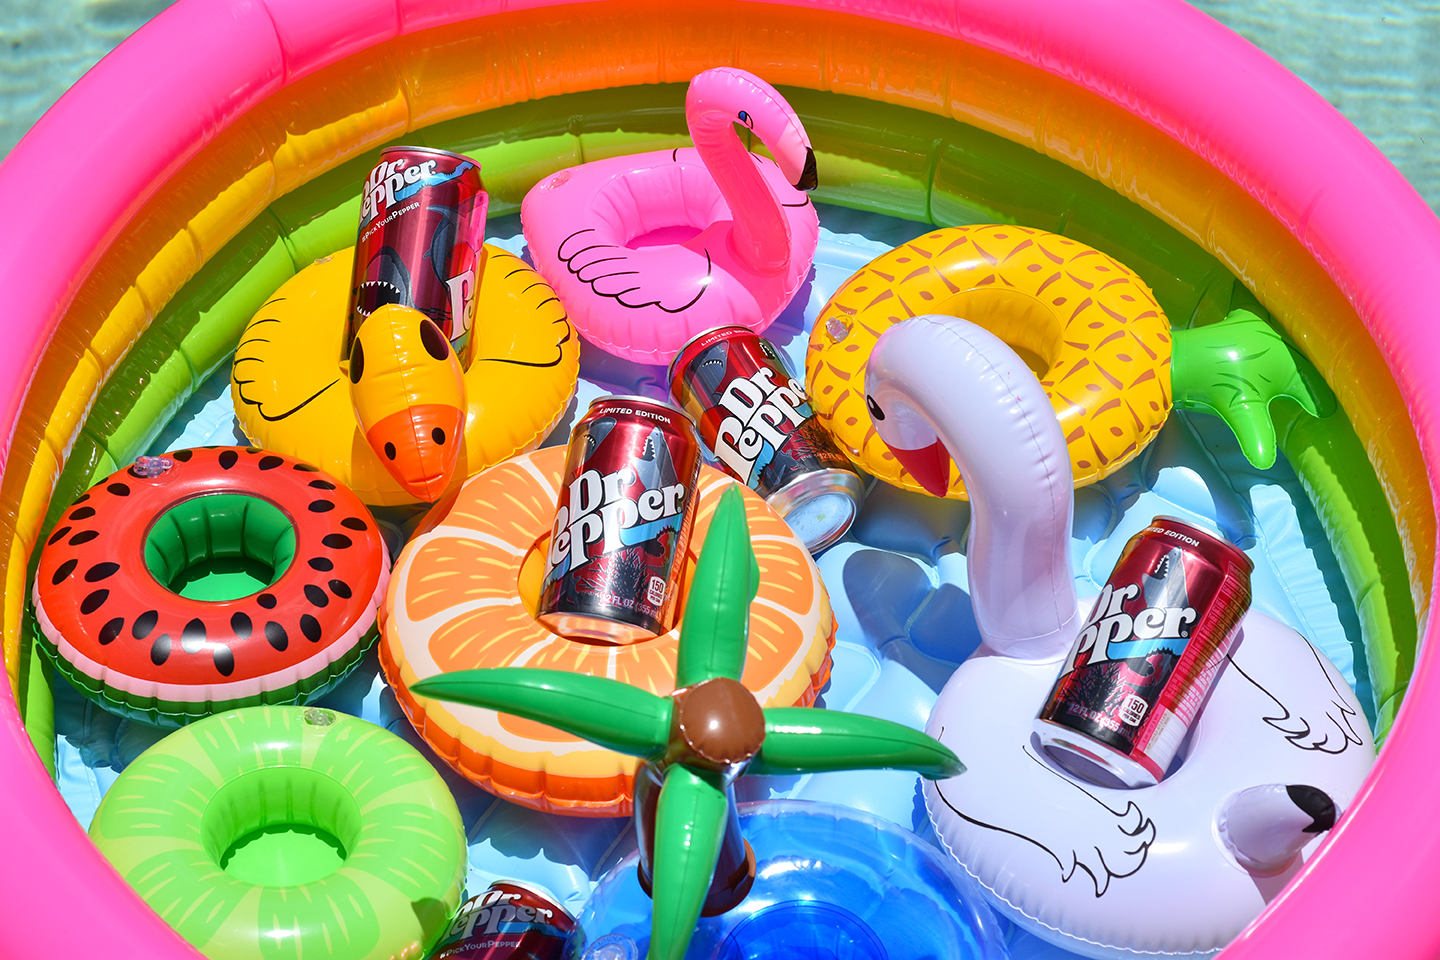 pool party ideas for adults • happy family blog